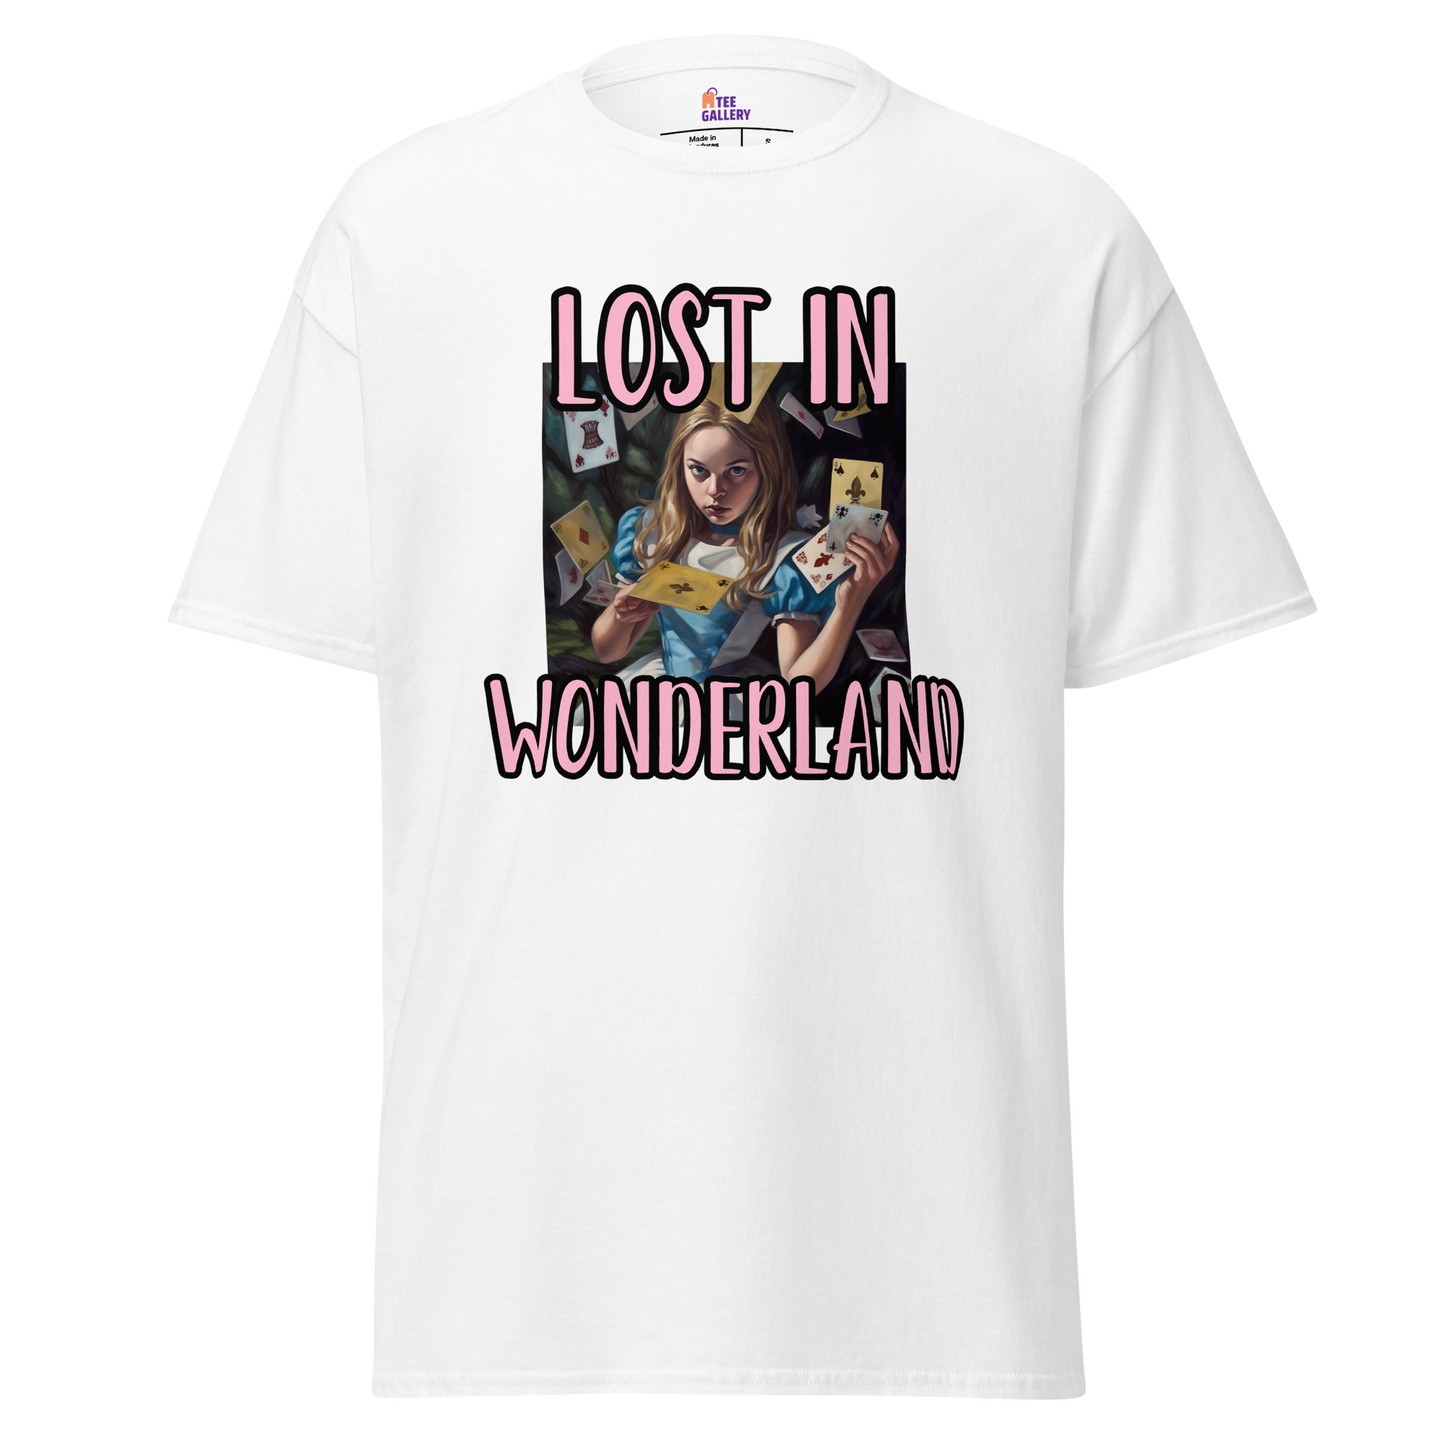 The Tee Gallery Alice in Wonderland Graphic T-Shirt